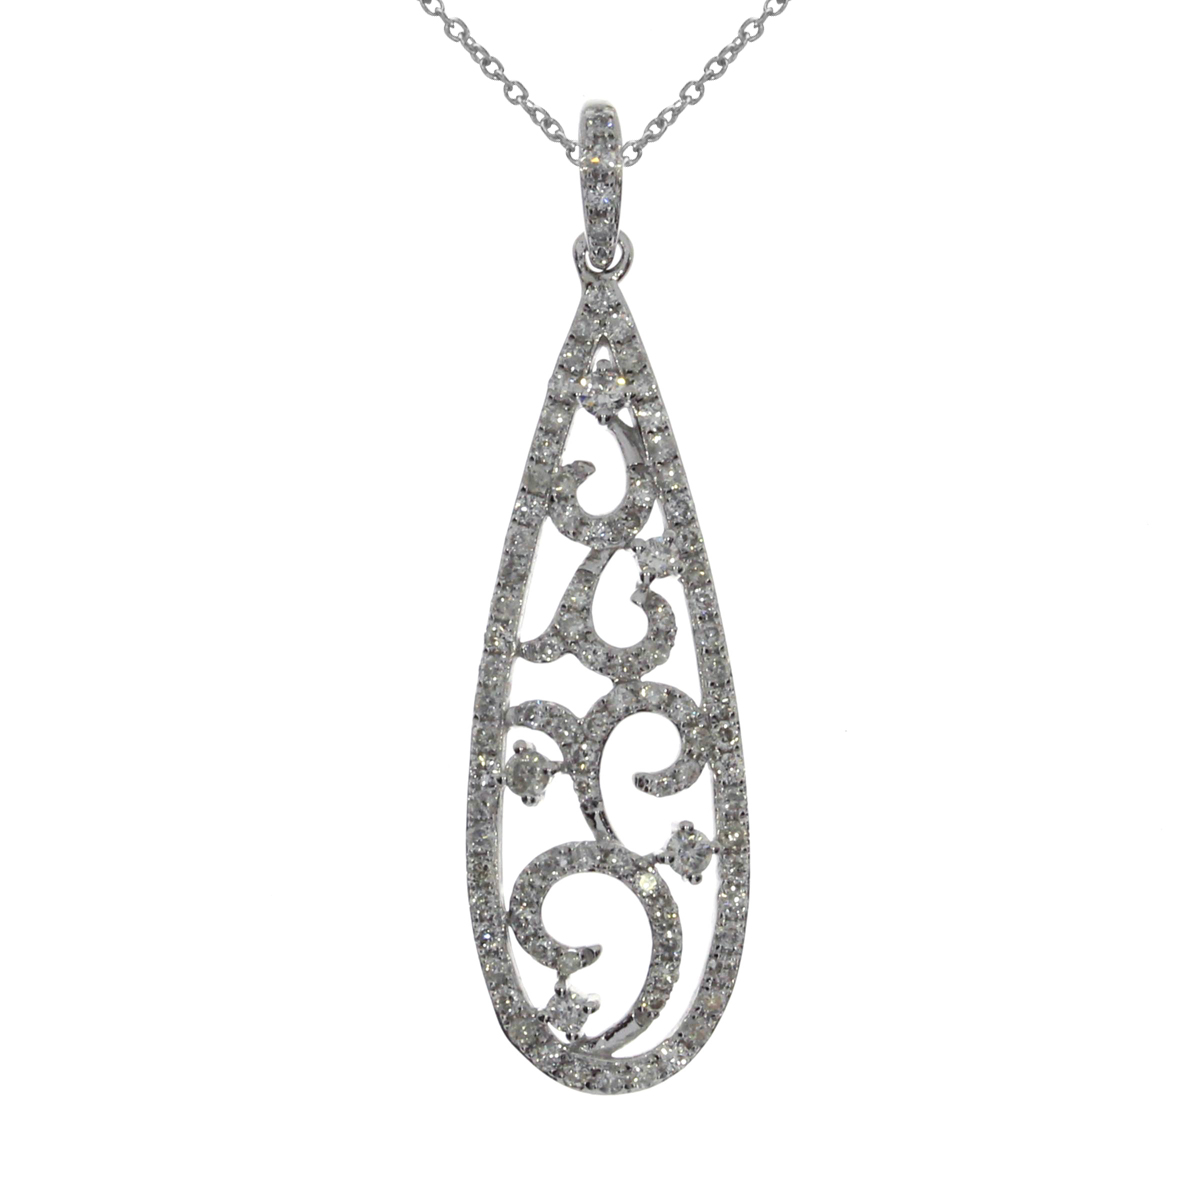 JCX3047: This long pendant contains .48 total carats of bright diamonds in modern and stylish design.